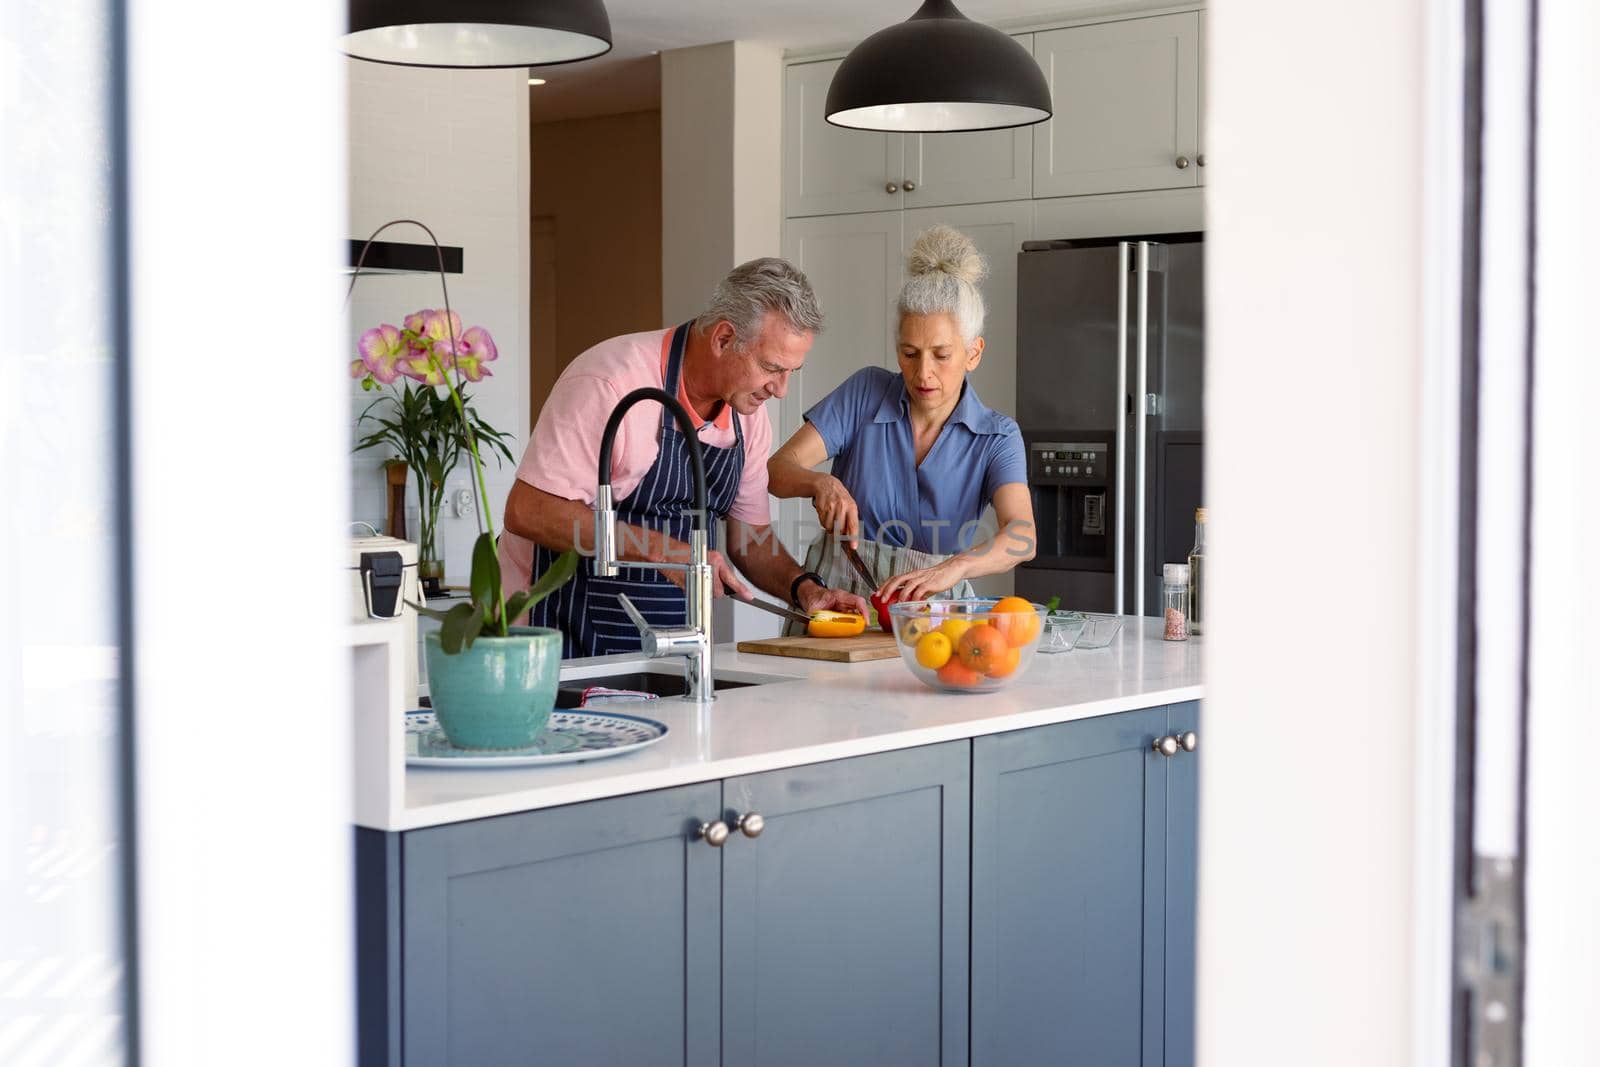 Focused caucasian senior couple standing in kitchen and preparing meal together by Wavebreakmedia